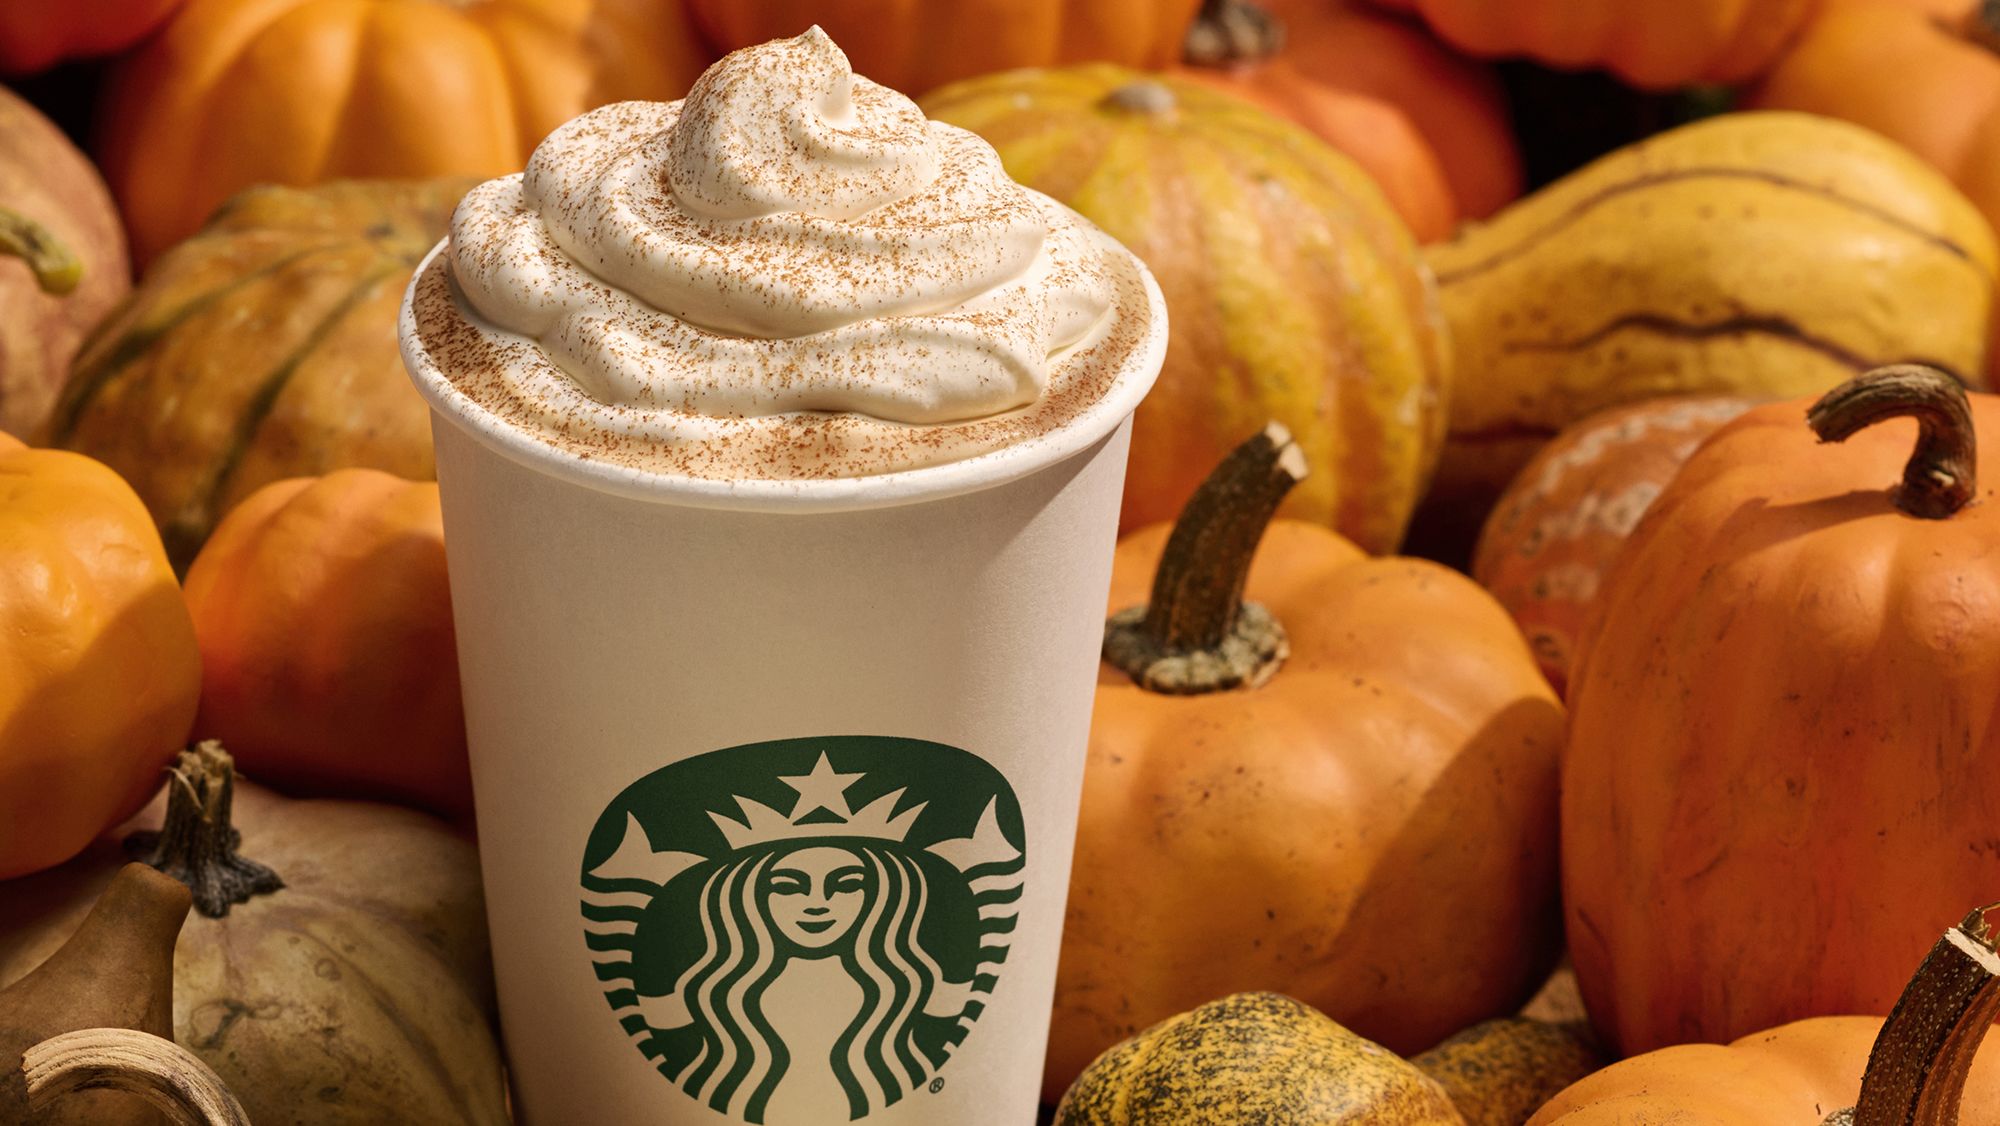 Starbucks' Pumpkin Spice Latte is back, and it's celebrating its 20th anniversary | CNN Business